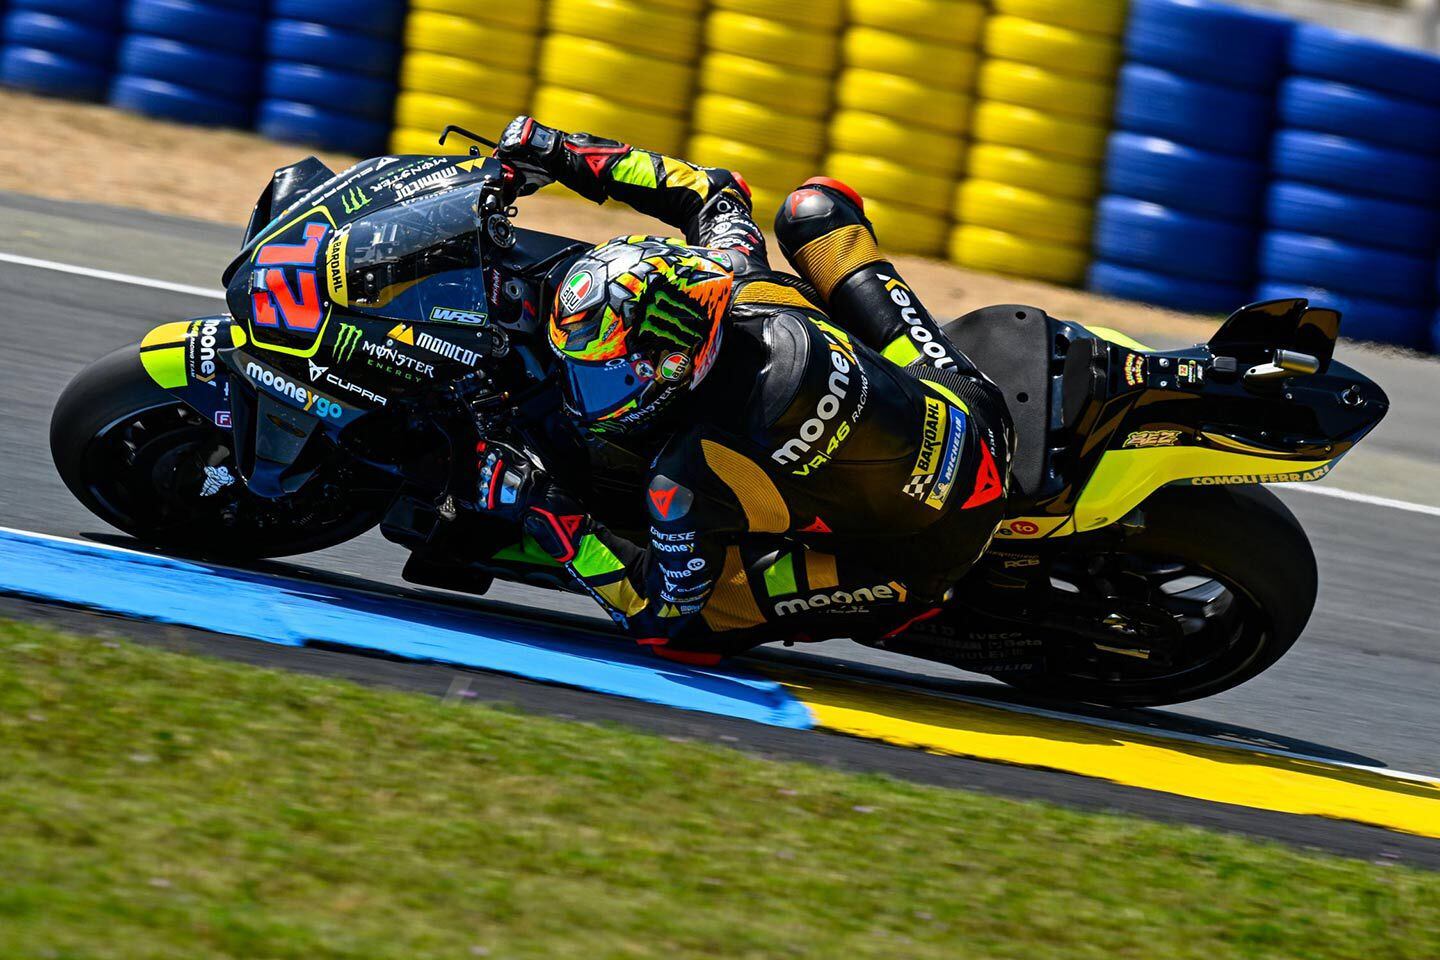 Marco Bezzecchi put the Mooney VR46 Racing Team back on the podium with a dominant win in Le Mans, while others struggled behind him.